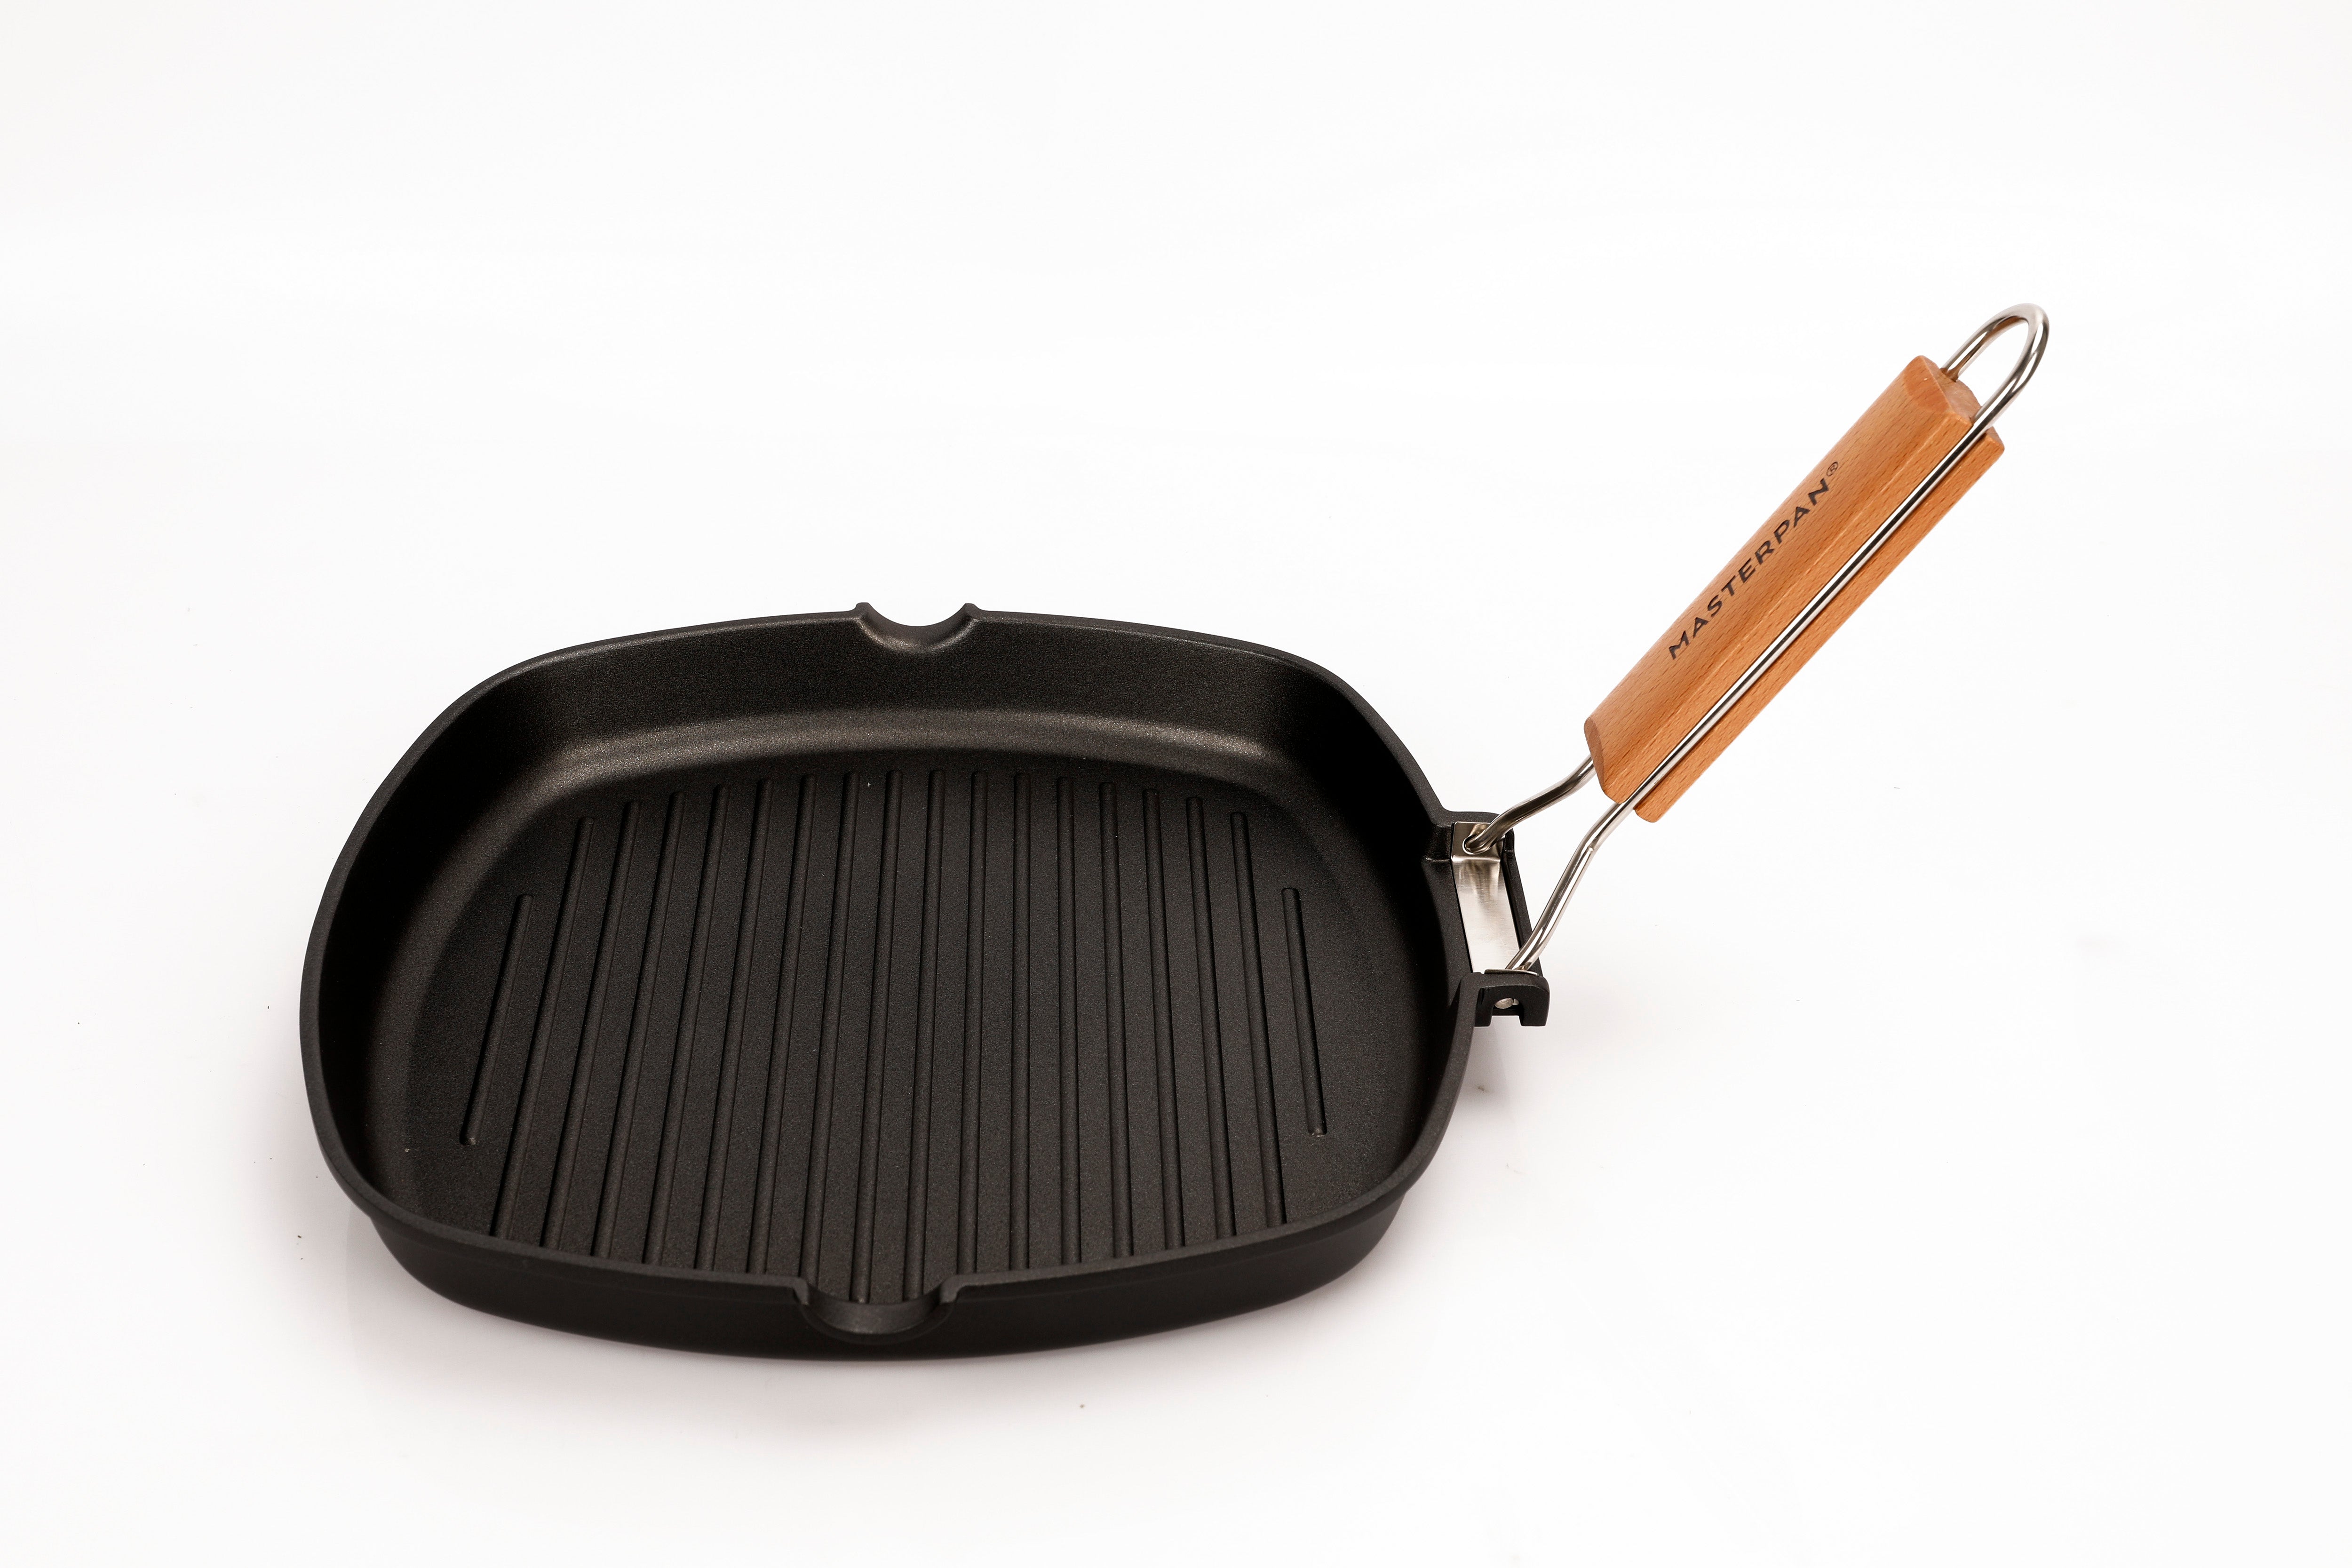 MASTERPAN Nonstick Grill Pan with Folding Handle, 8